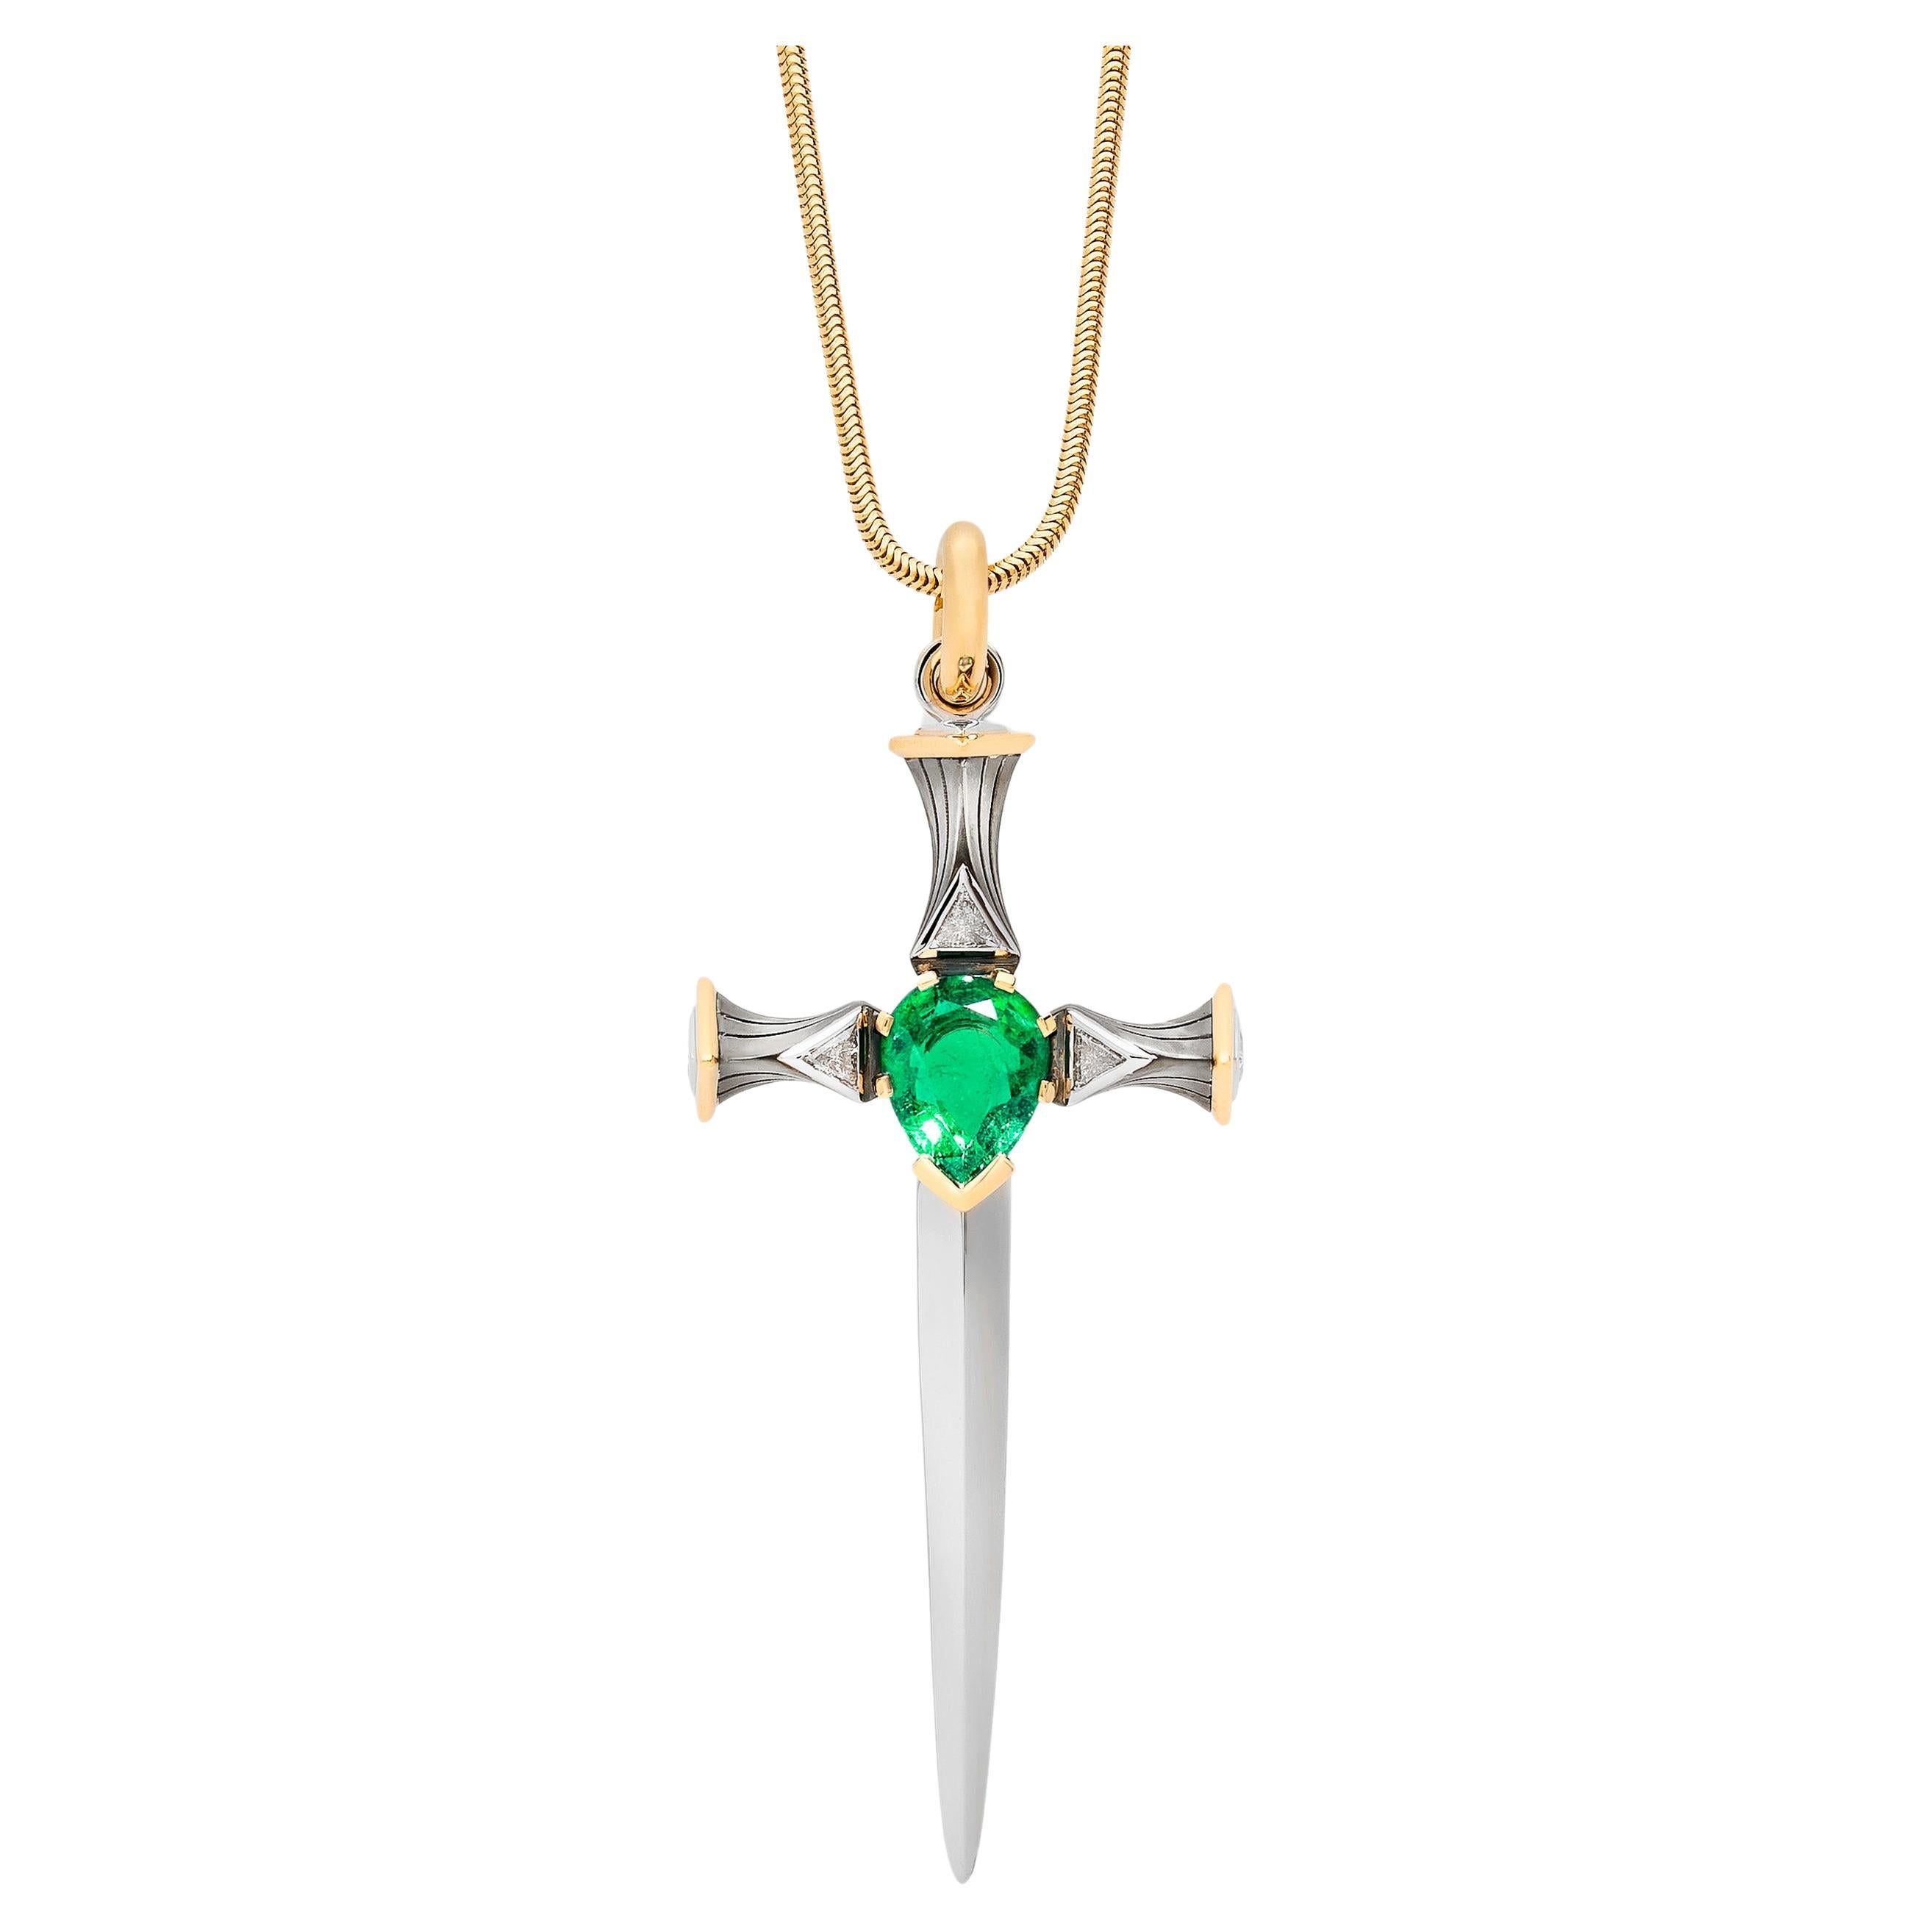 Emerald Épée Pendant in 18k Yellow Gold & Distressed Silver by Elie Top